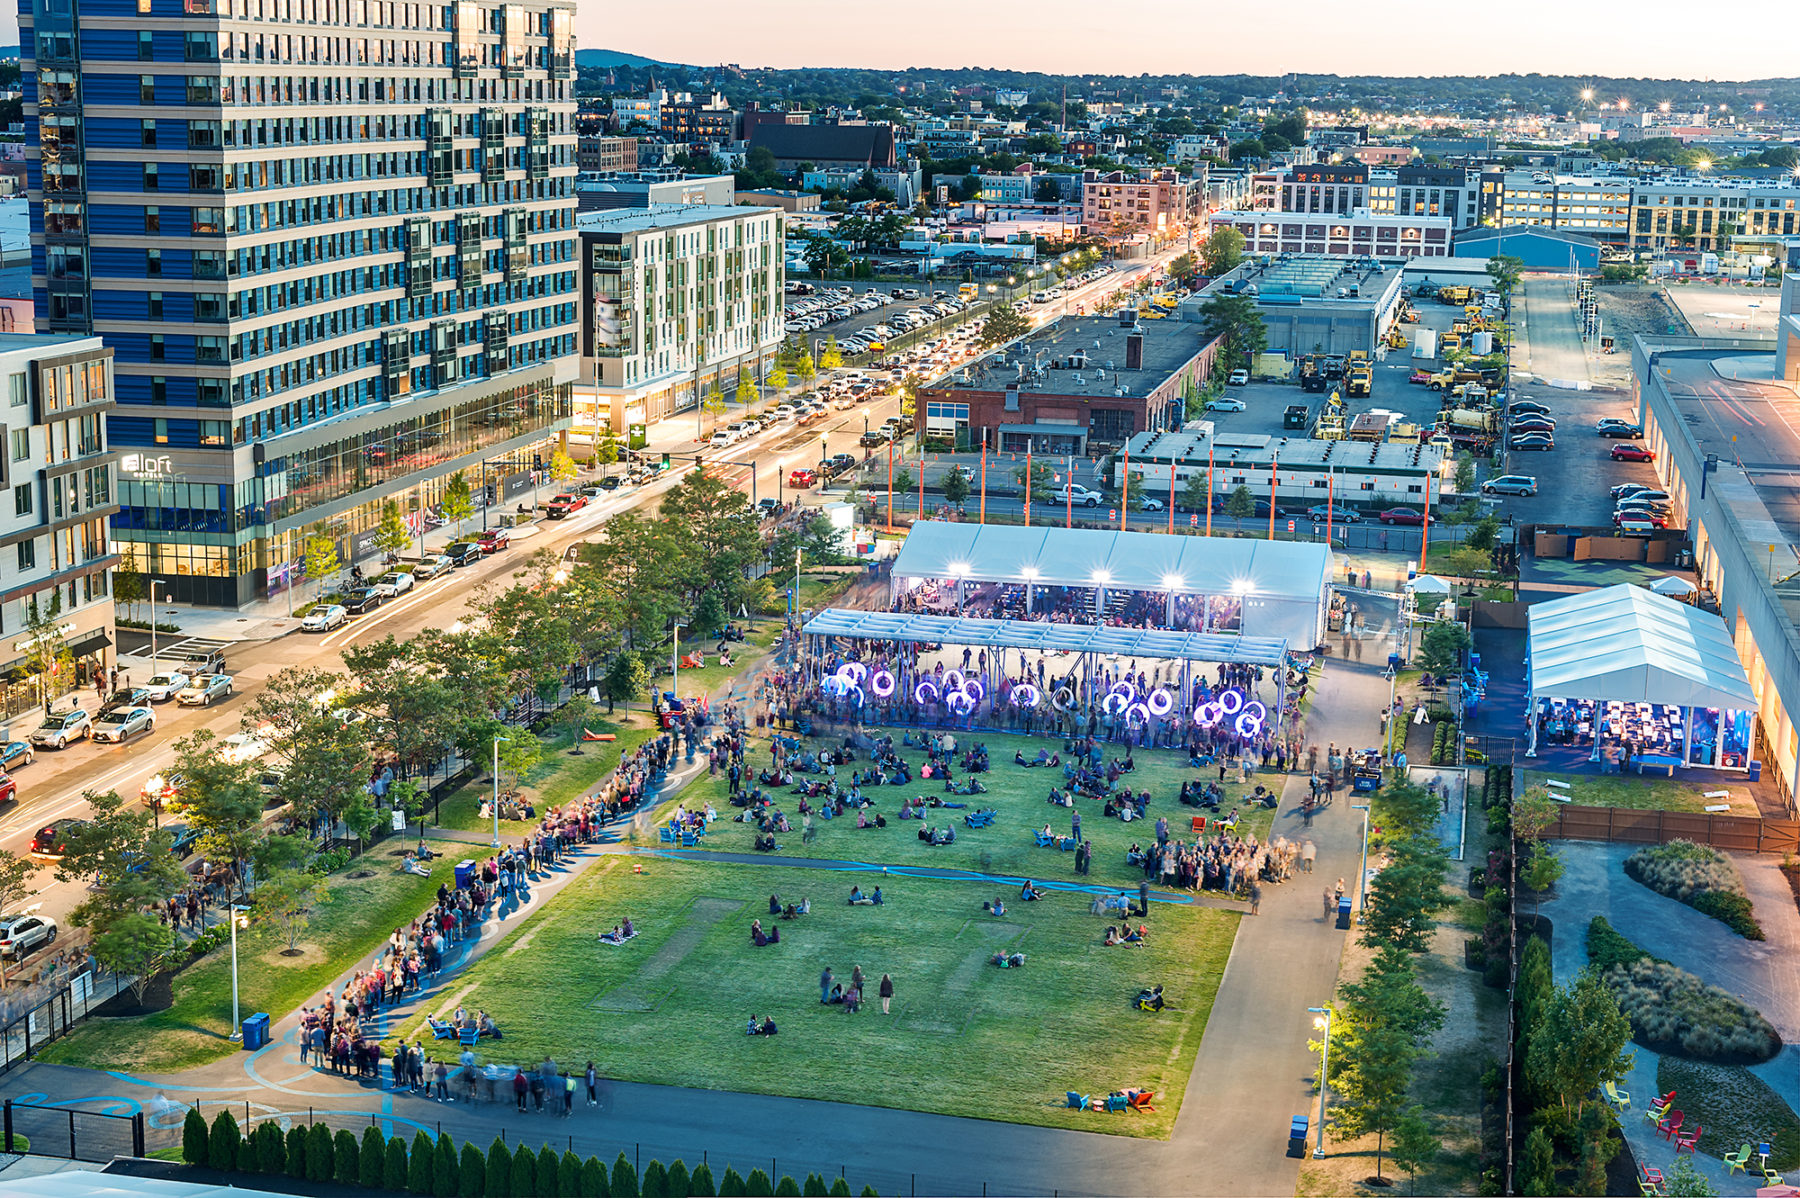 Aerial photo overlooking the built hotel and Lawn on D at dusk. An event is happening on the lawn.